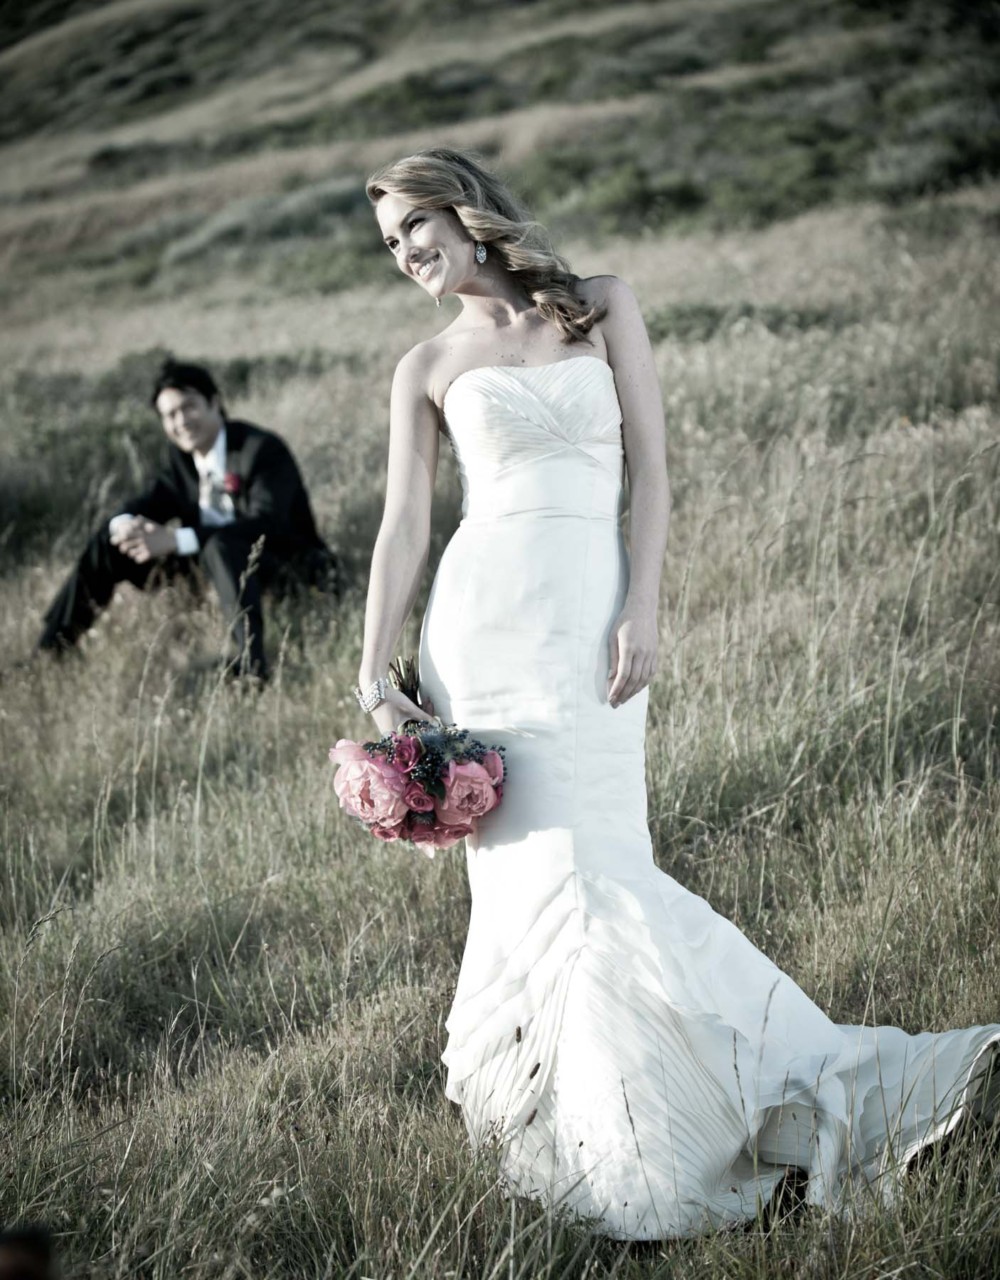 Looking for a summer wedding photographer in Wasilla?